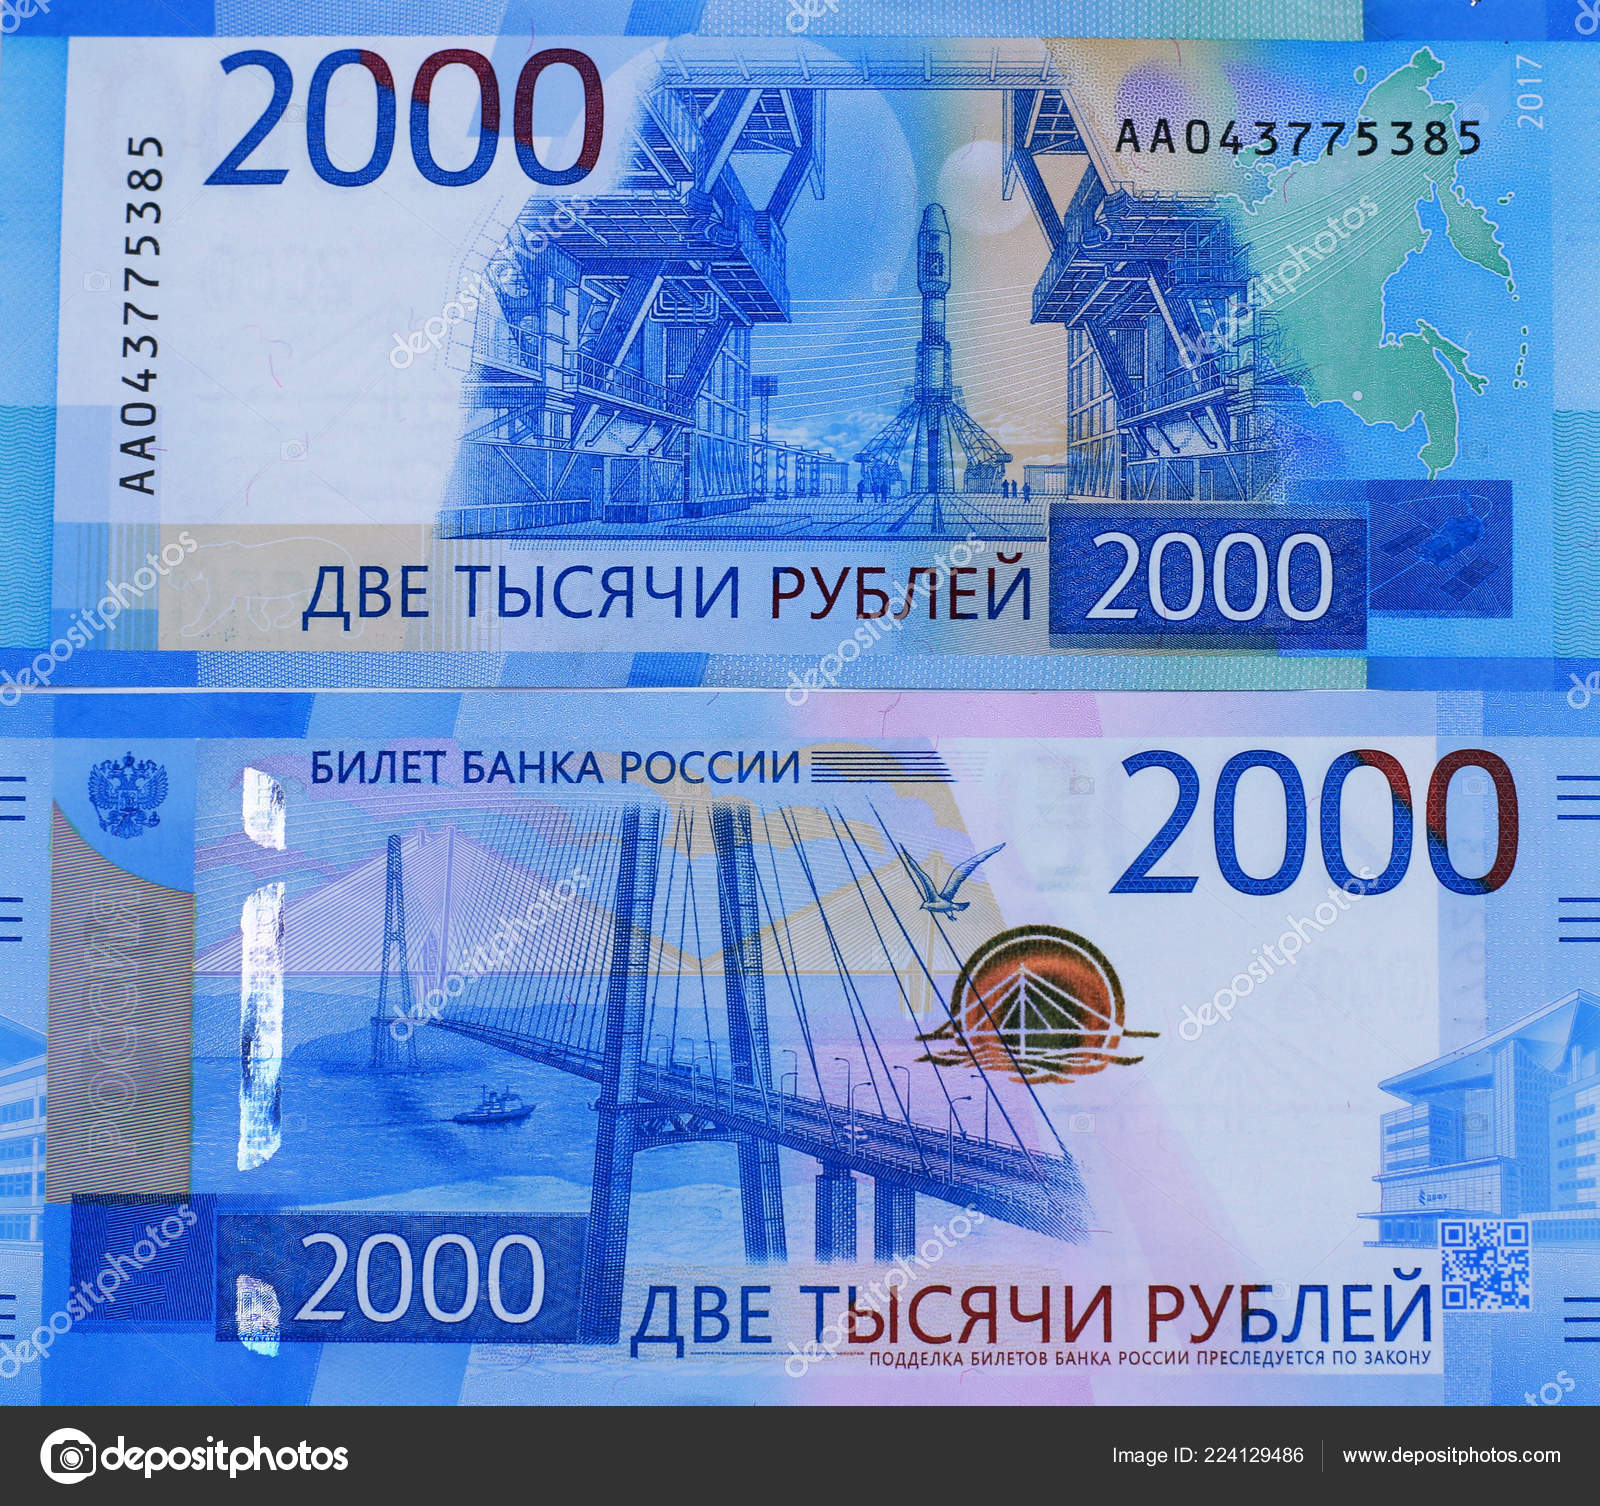 100 russian ruble to myr